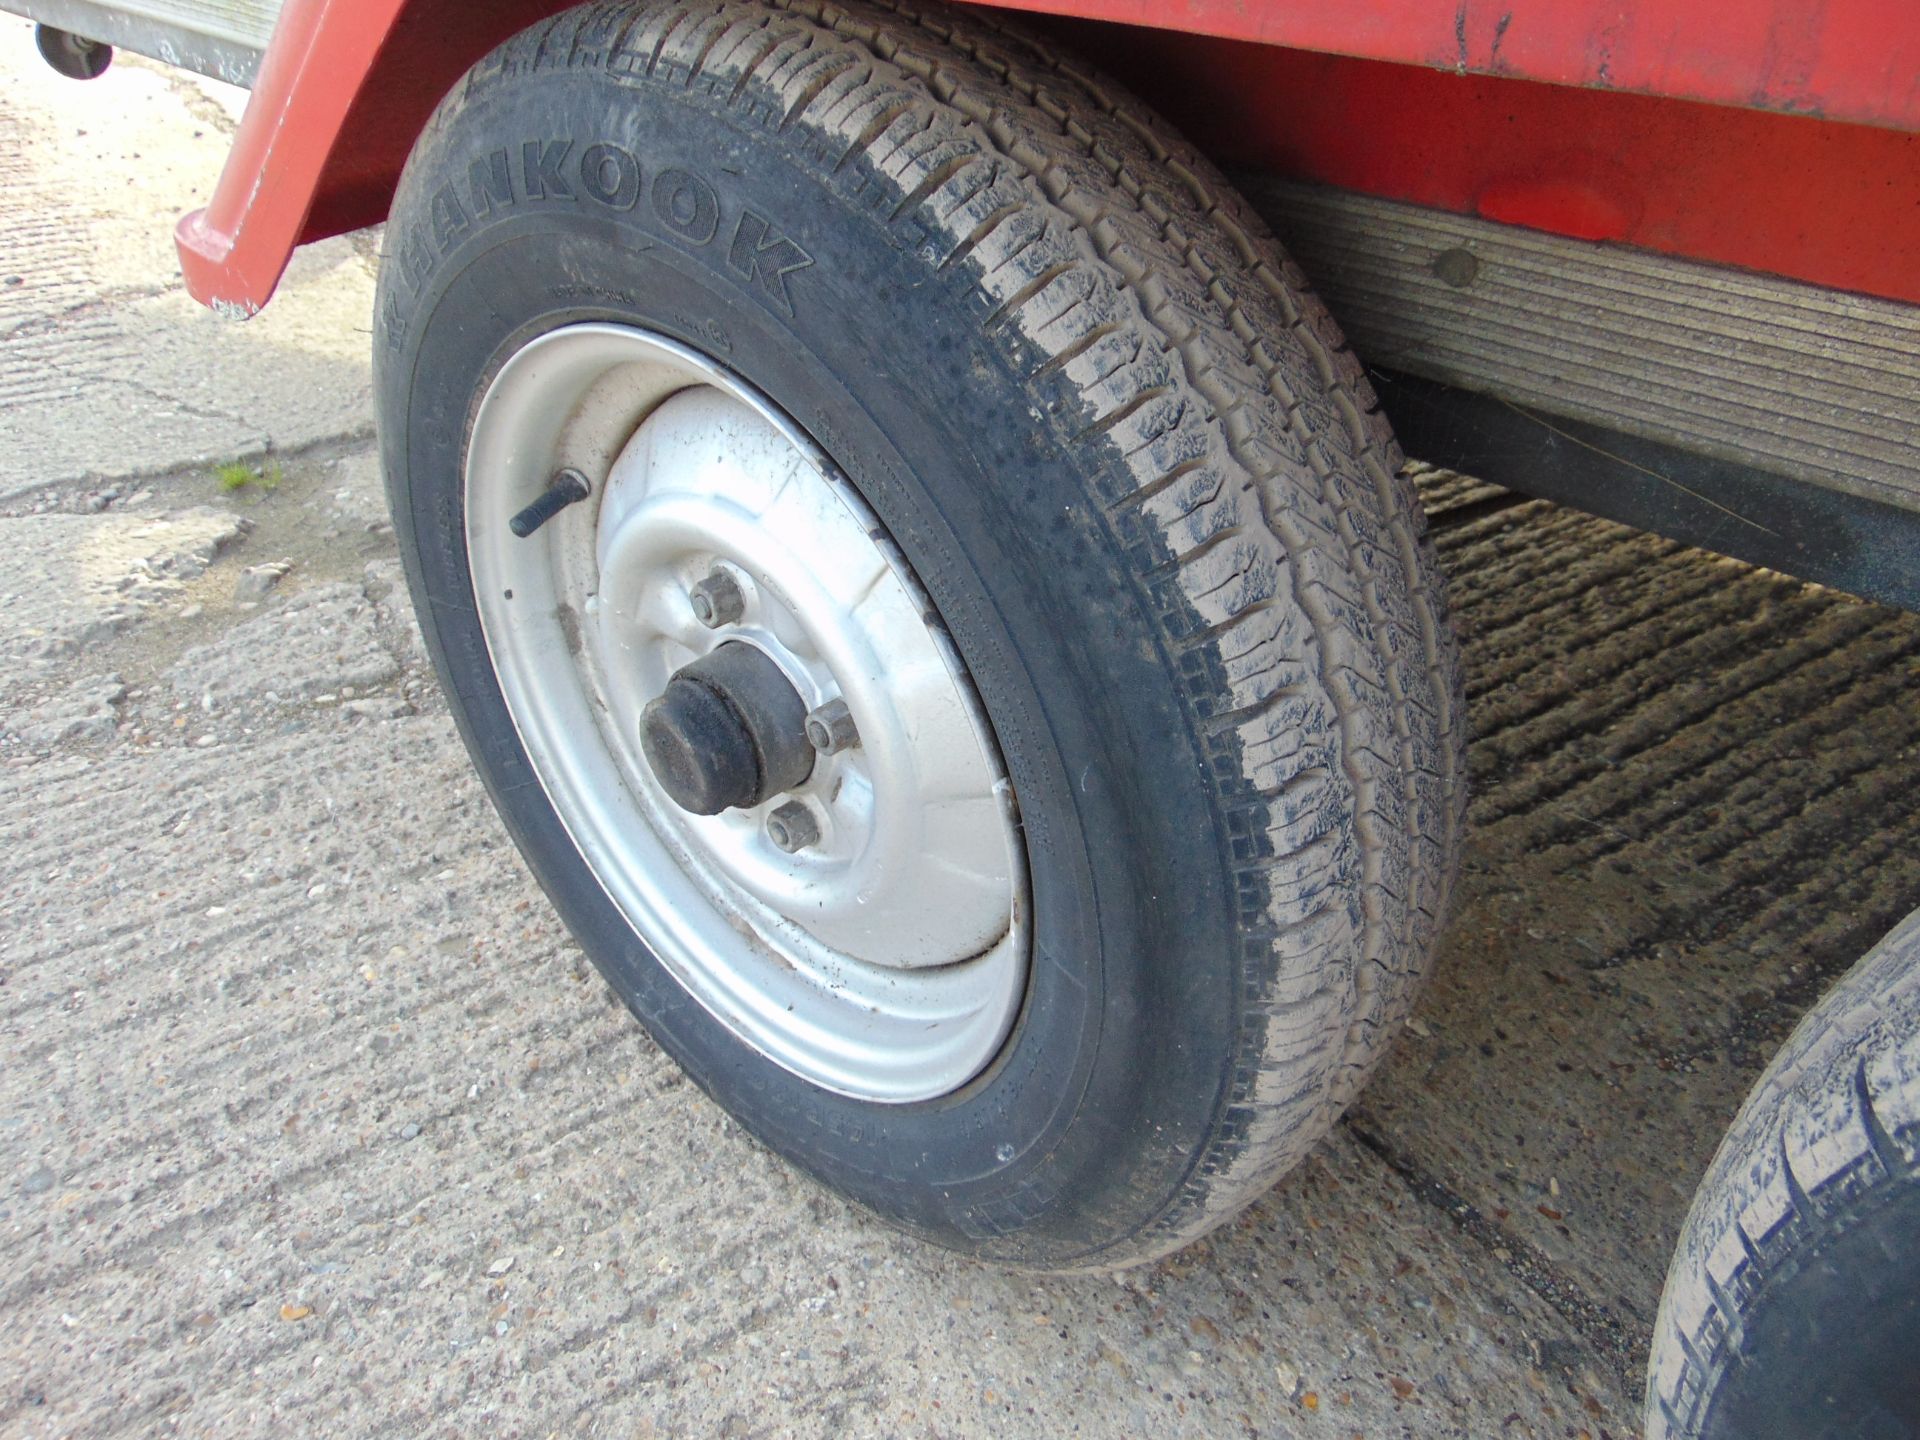 From UK Fire & Rescue Bingham 2 axle Show Trailer c/w spare wheel etc - Image 6 of 13